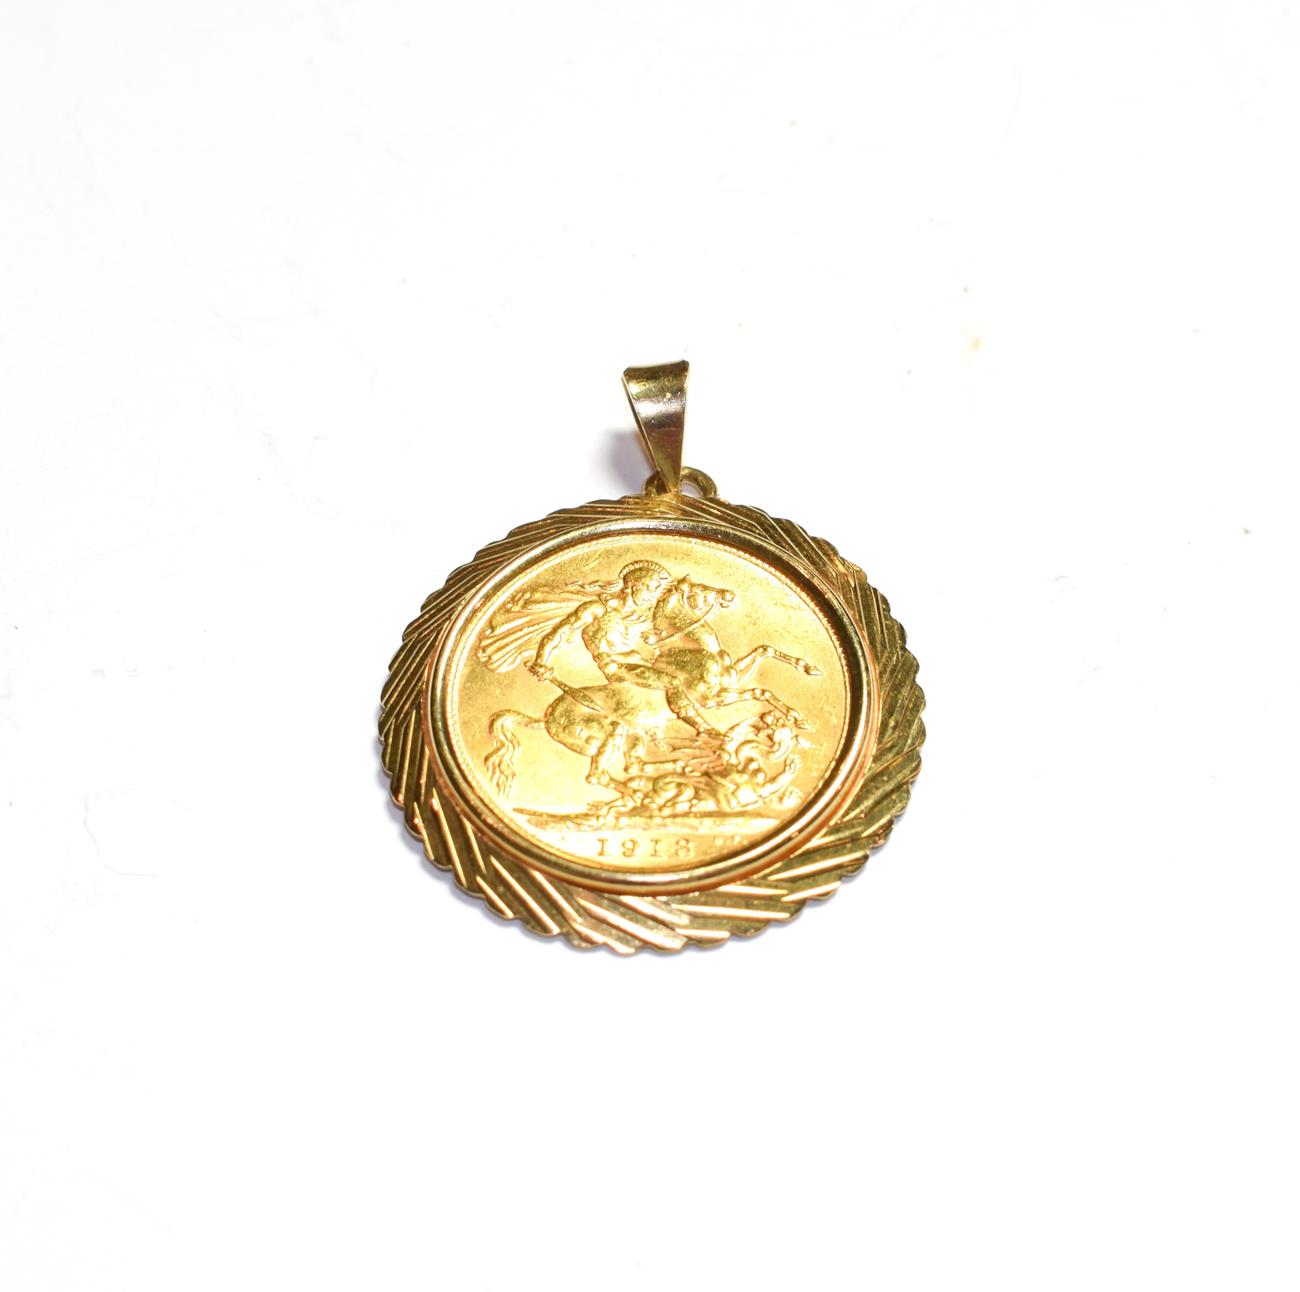 Lot 70 - A 1913 full sovereign mounted as a pendant, length 3.6cm